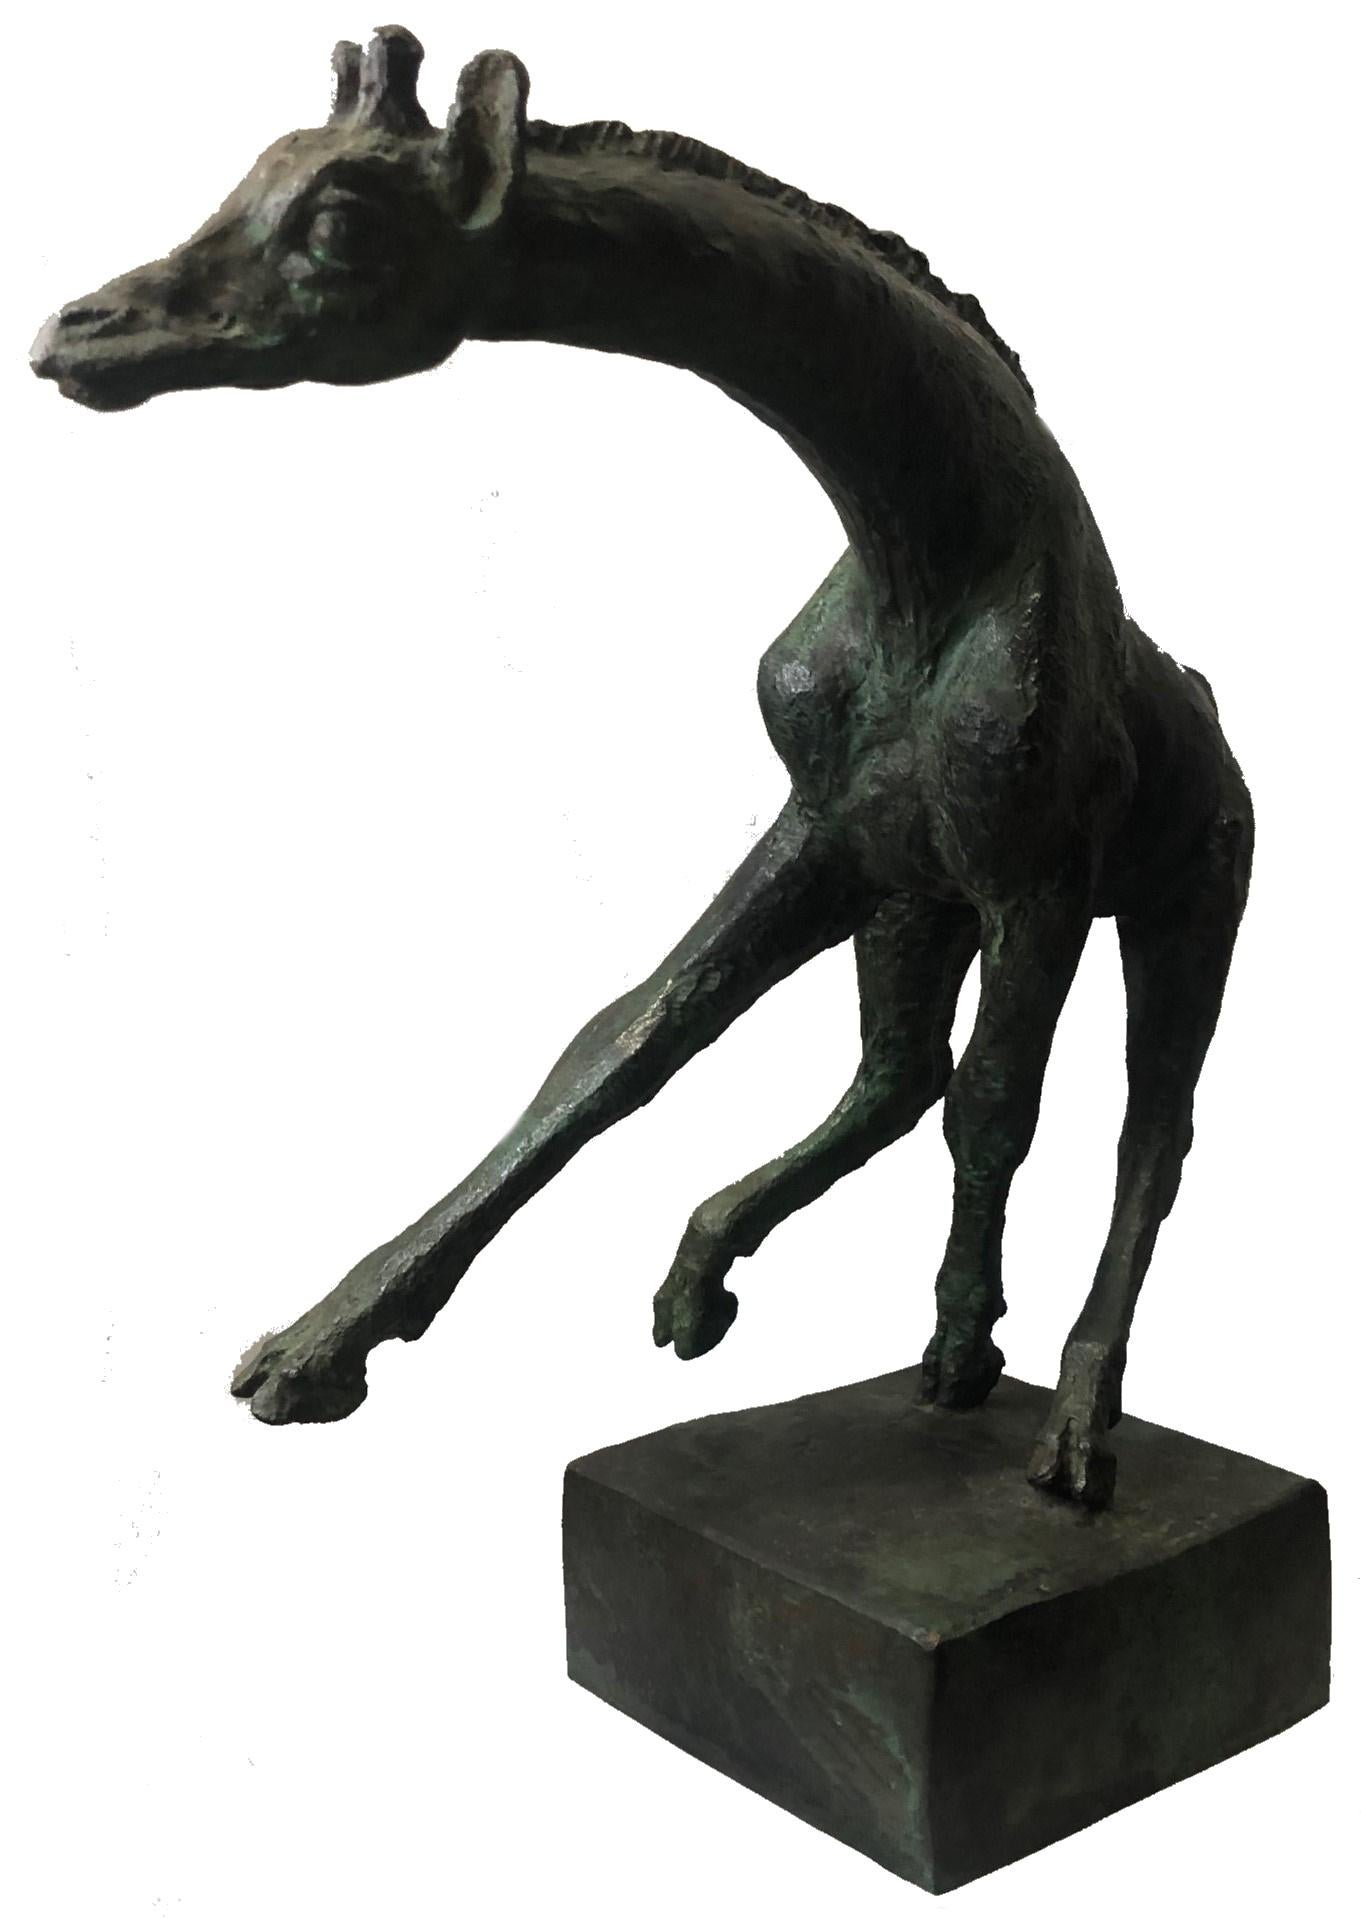 ABOUT SCULPTURE
An incredibly graceful depiction of an animal beloved by everyone in the interpretation of the famous Danish master of the last century, Hugo Liisberg attracts the viewer's eye with the amazingly natural dynamics of the pose and the